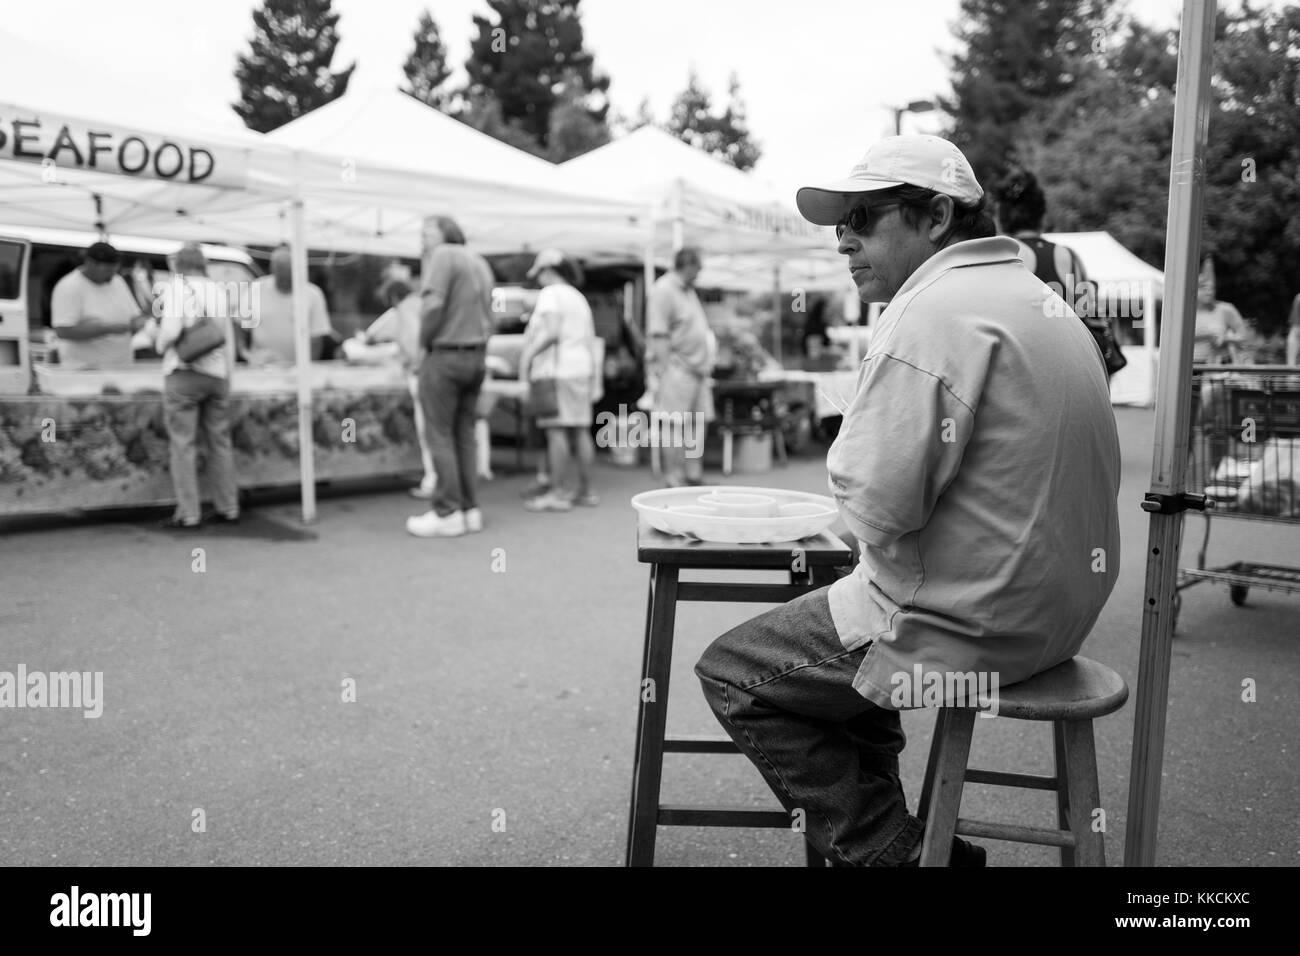 At a weekly farmers' market in the San Francisco Bay Area, a vendor wearing a baseball hat and sunglasses sits on a stool in front of his stand and prepares to hand out fruit samples to passing customers, as people shop at other stands in the background, Danville, California, June 5, 2016. Stock Photo